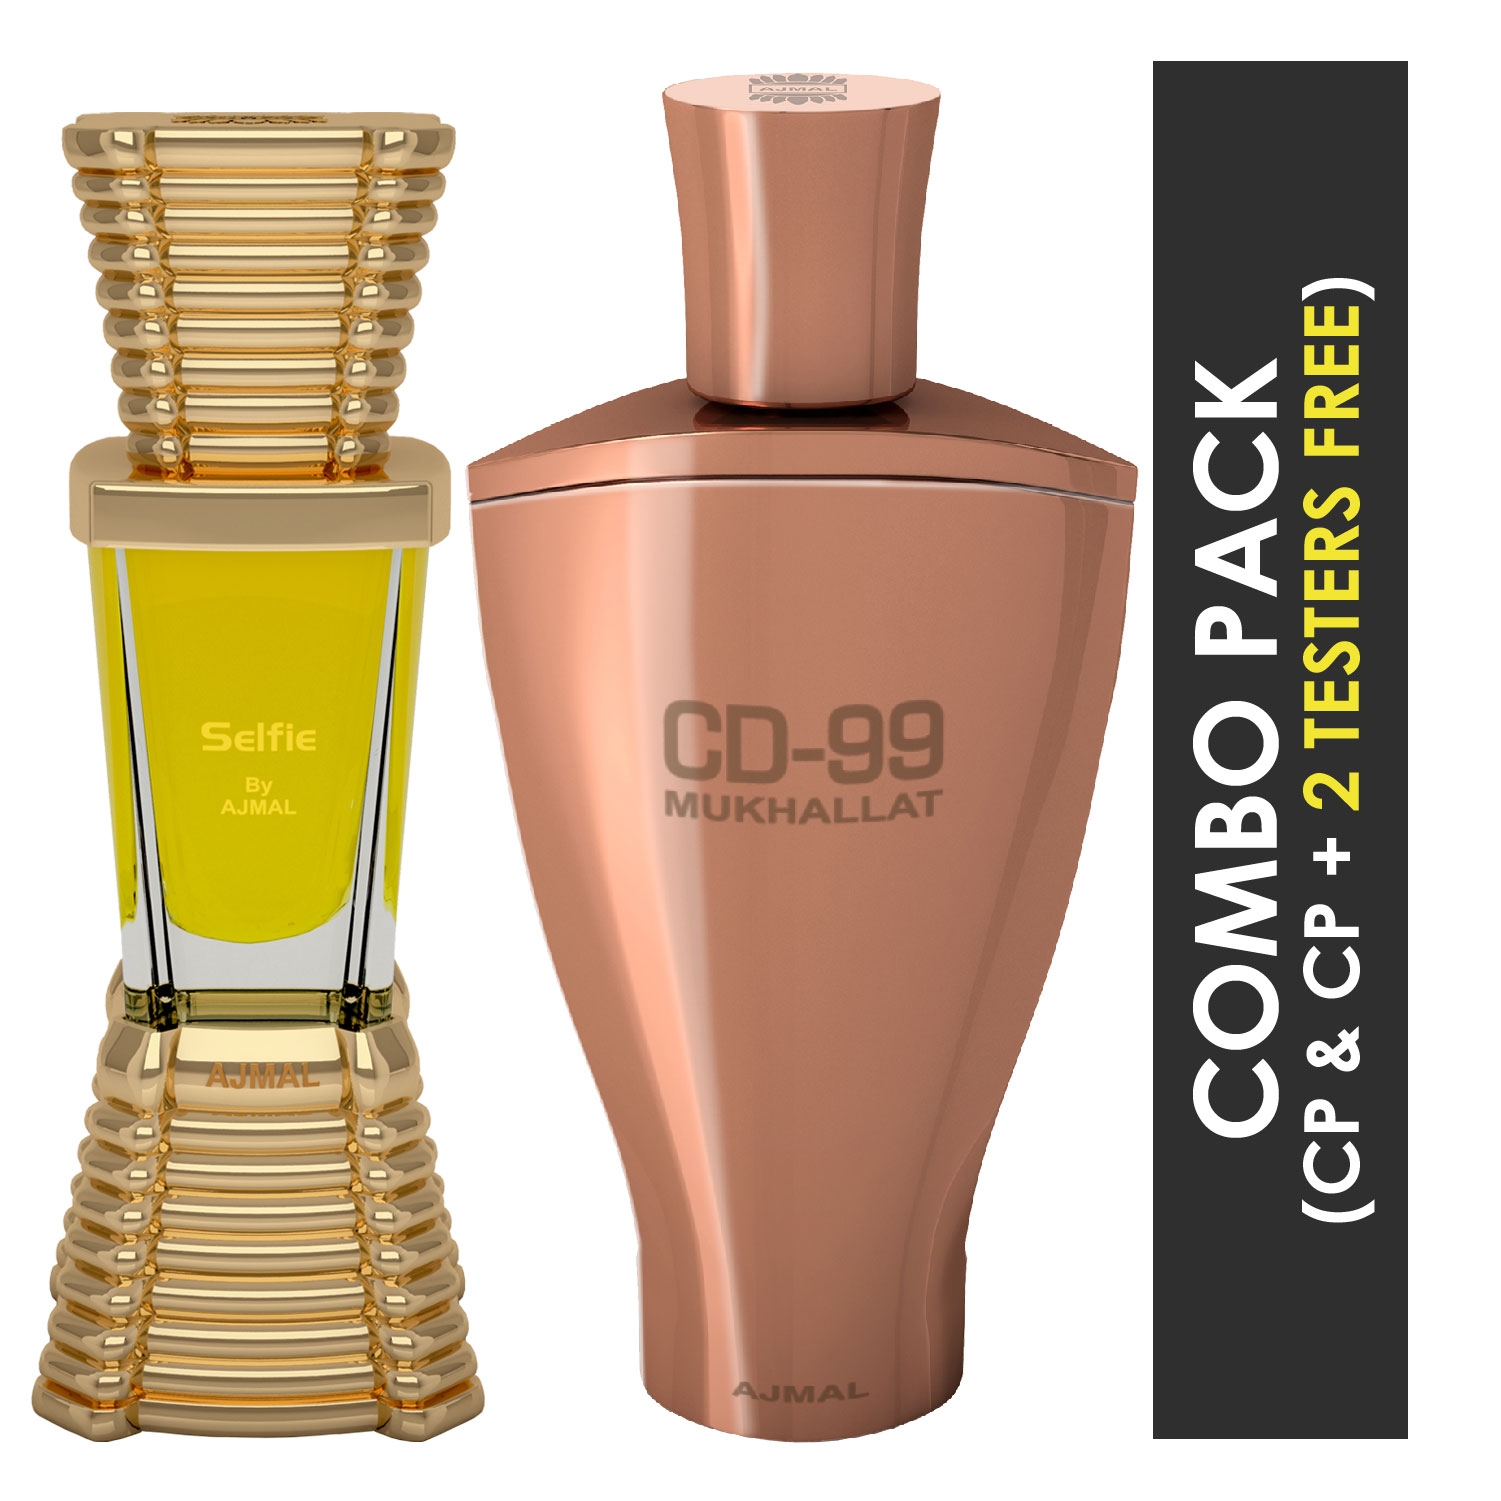 Ajmal | Ajmal Selfie Concentrated Perfume Attar 10ml for Men and CD 99 Mukhallat Concentrated Perfume Attar 14ml for Unisex + 2 Parfum Testers FREE